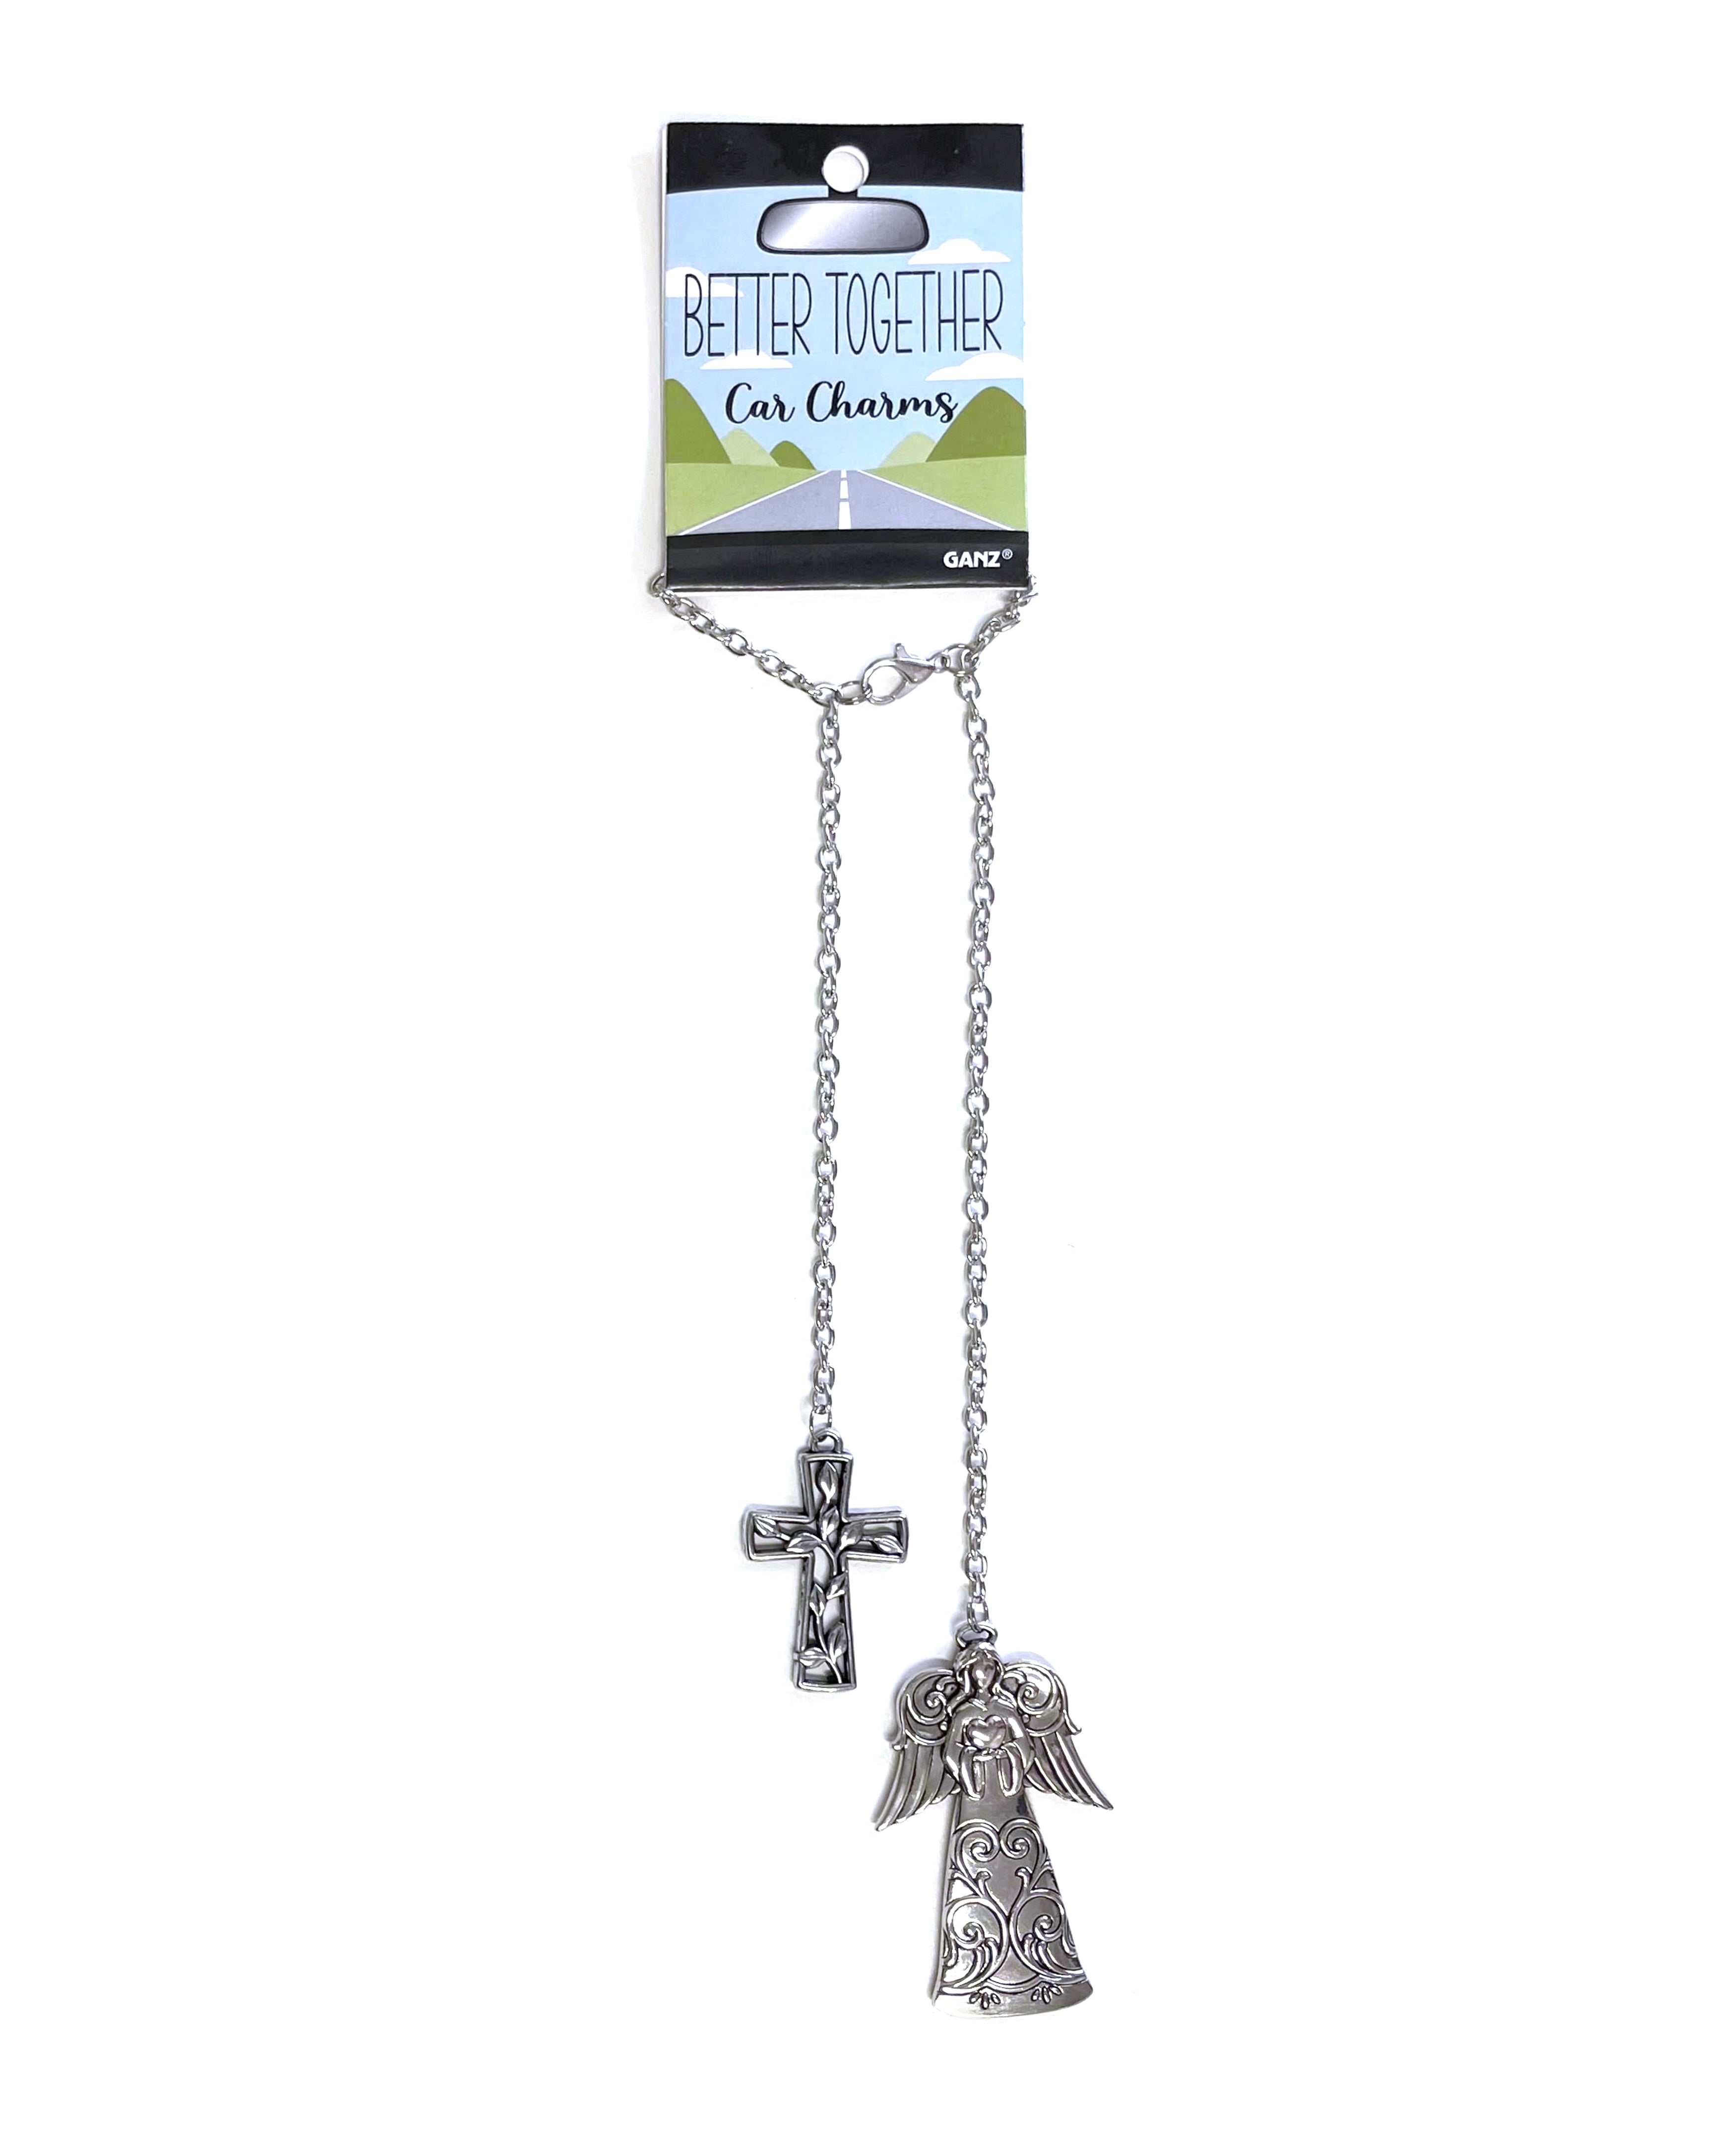 Hanging metallic chain style with Angel and cross special accessory to accompany you in your car